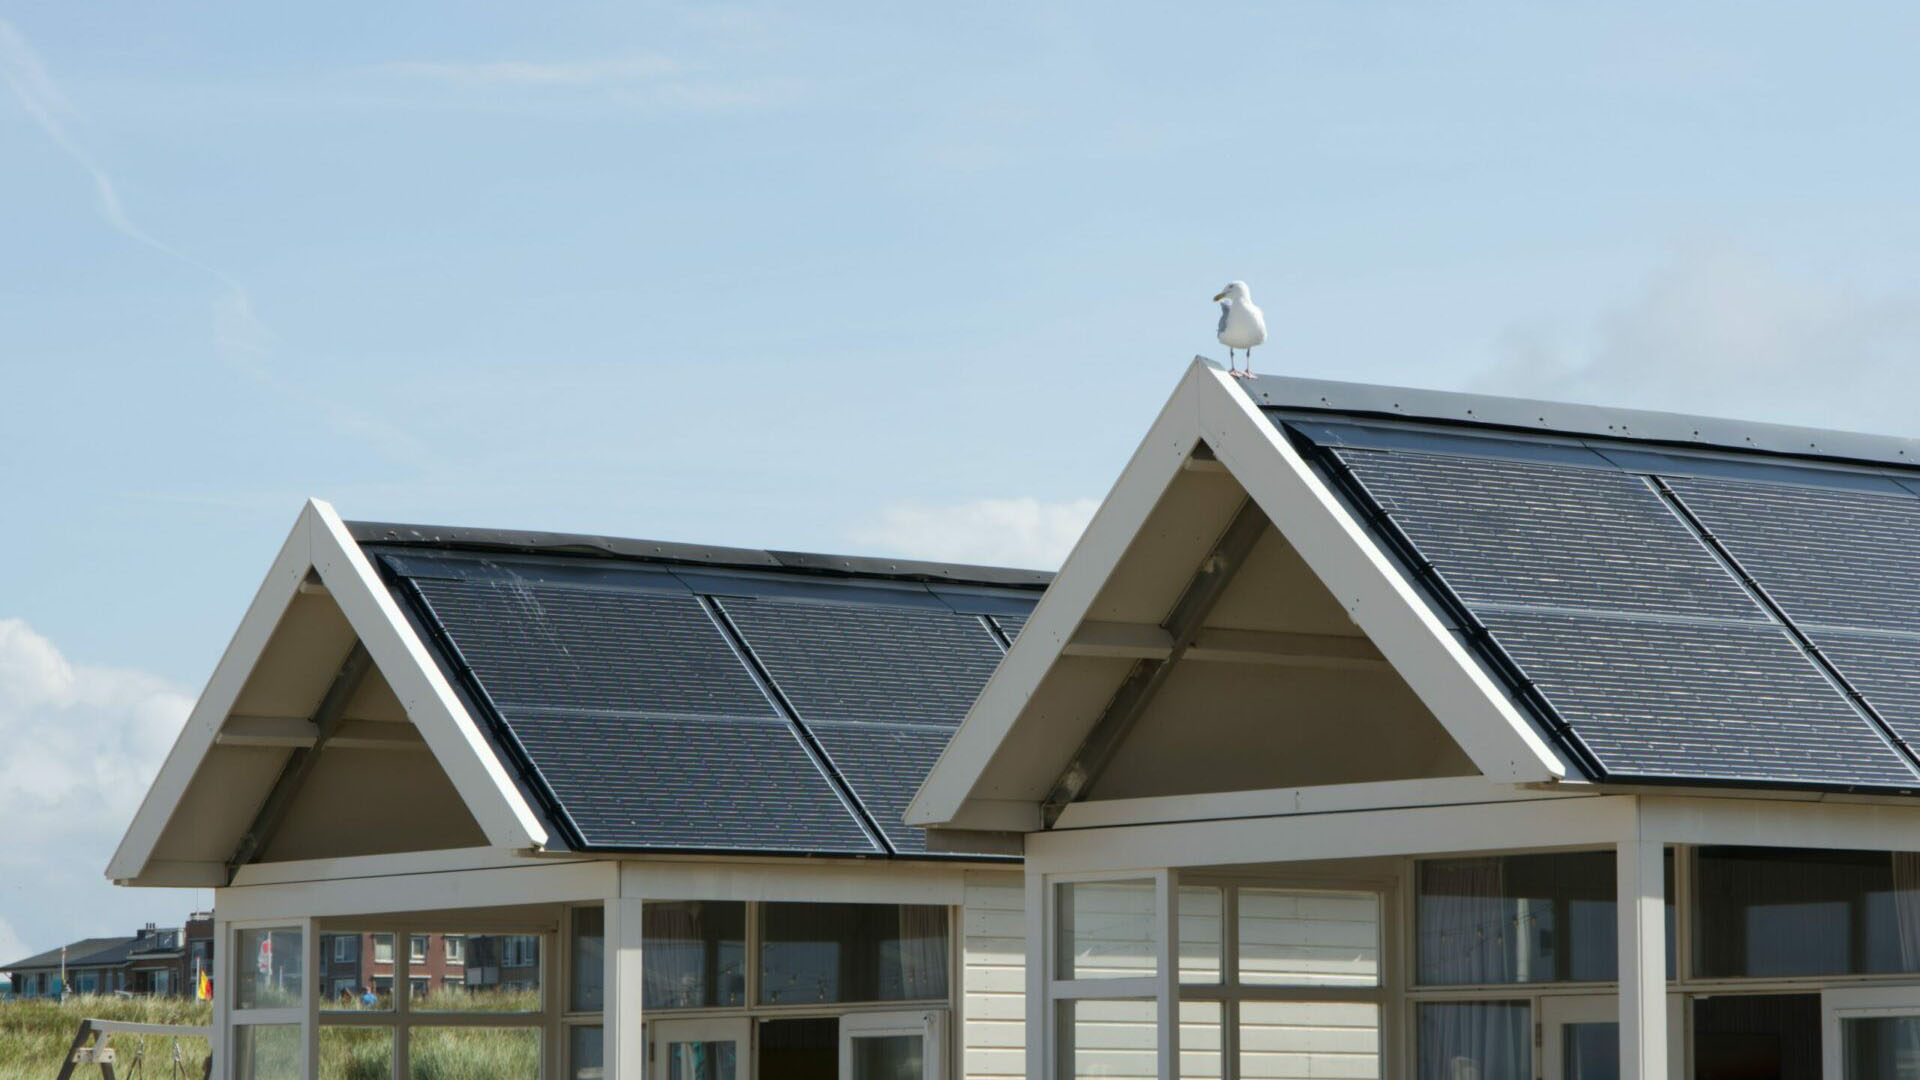 Solar panels installed on the roof within a community